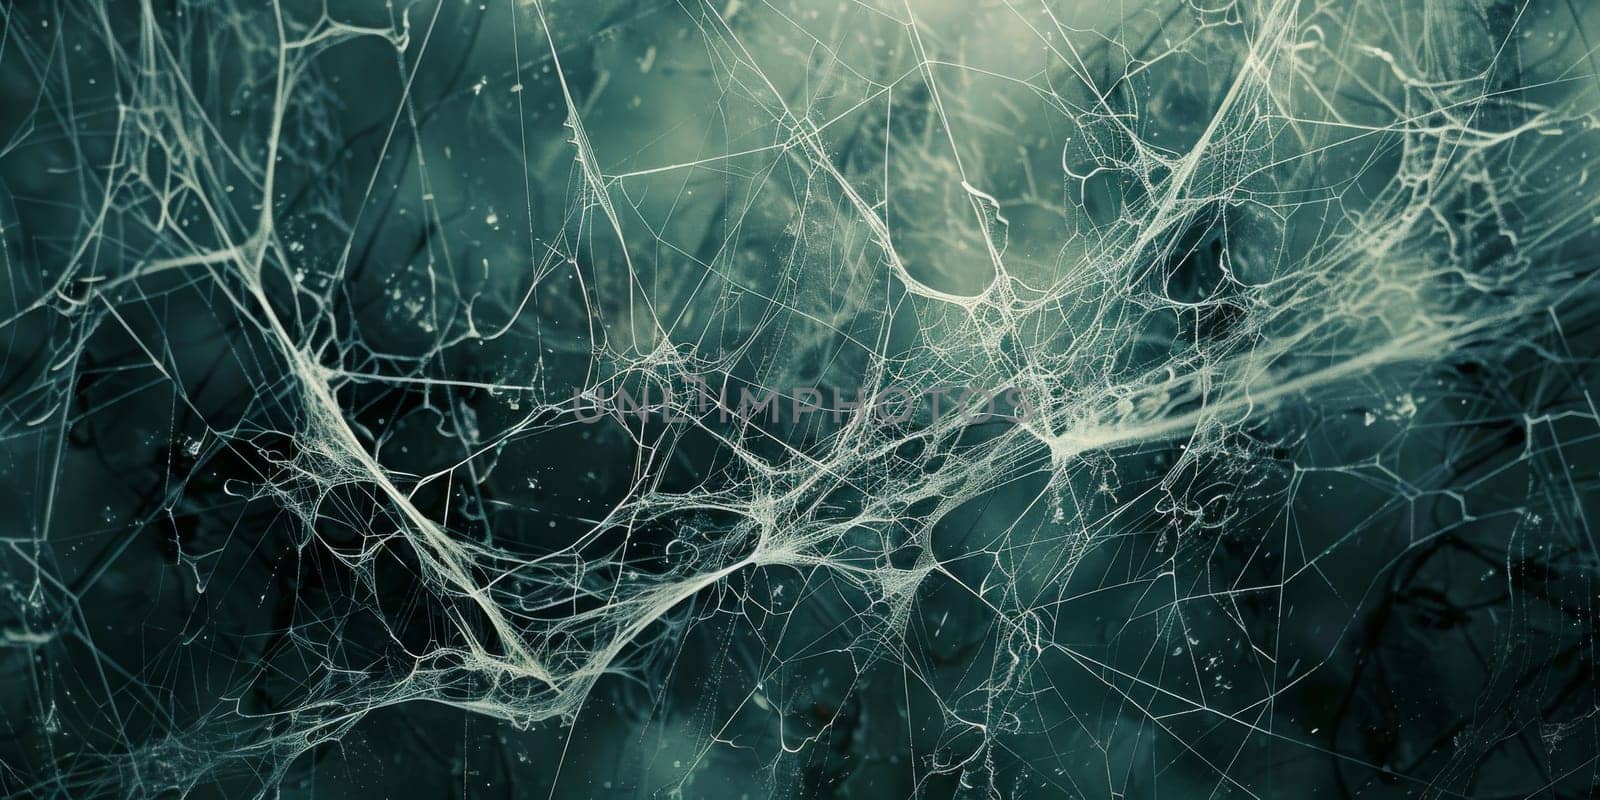 Dive into the labyrinthine structure of a spider's web by Kadula